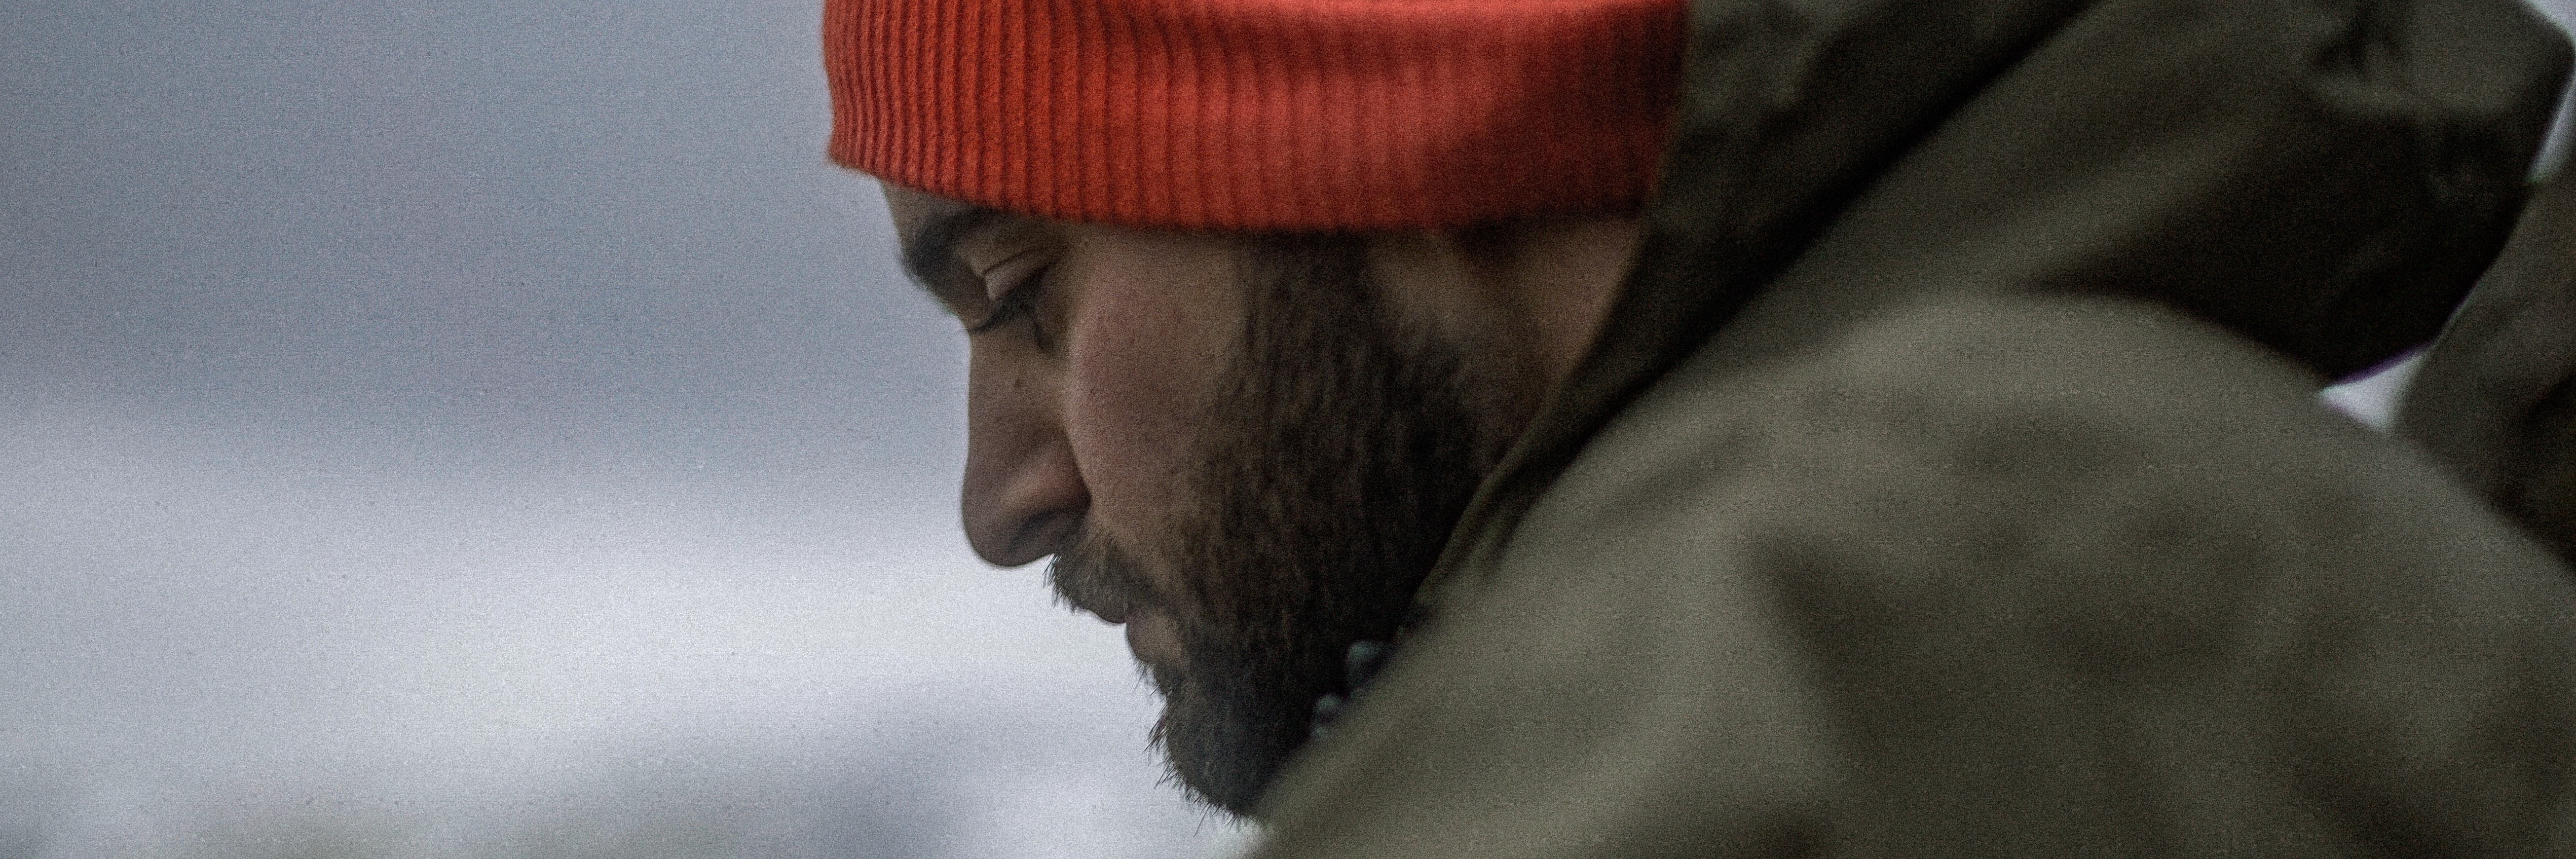 side view of man with beard and red hat looking down at ground depression